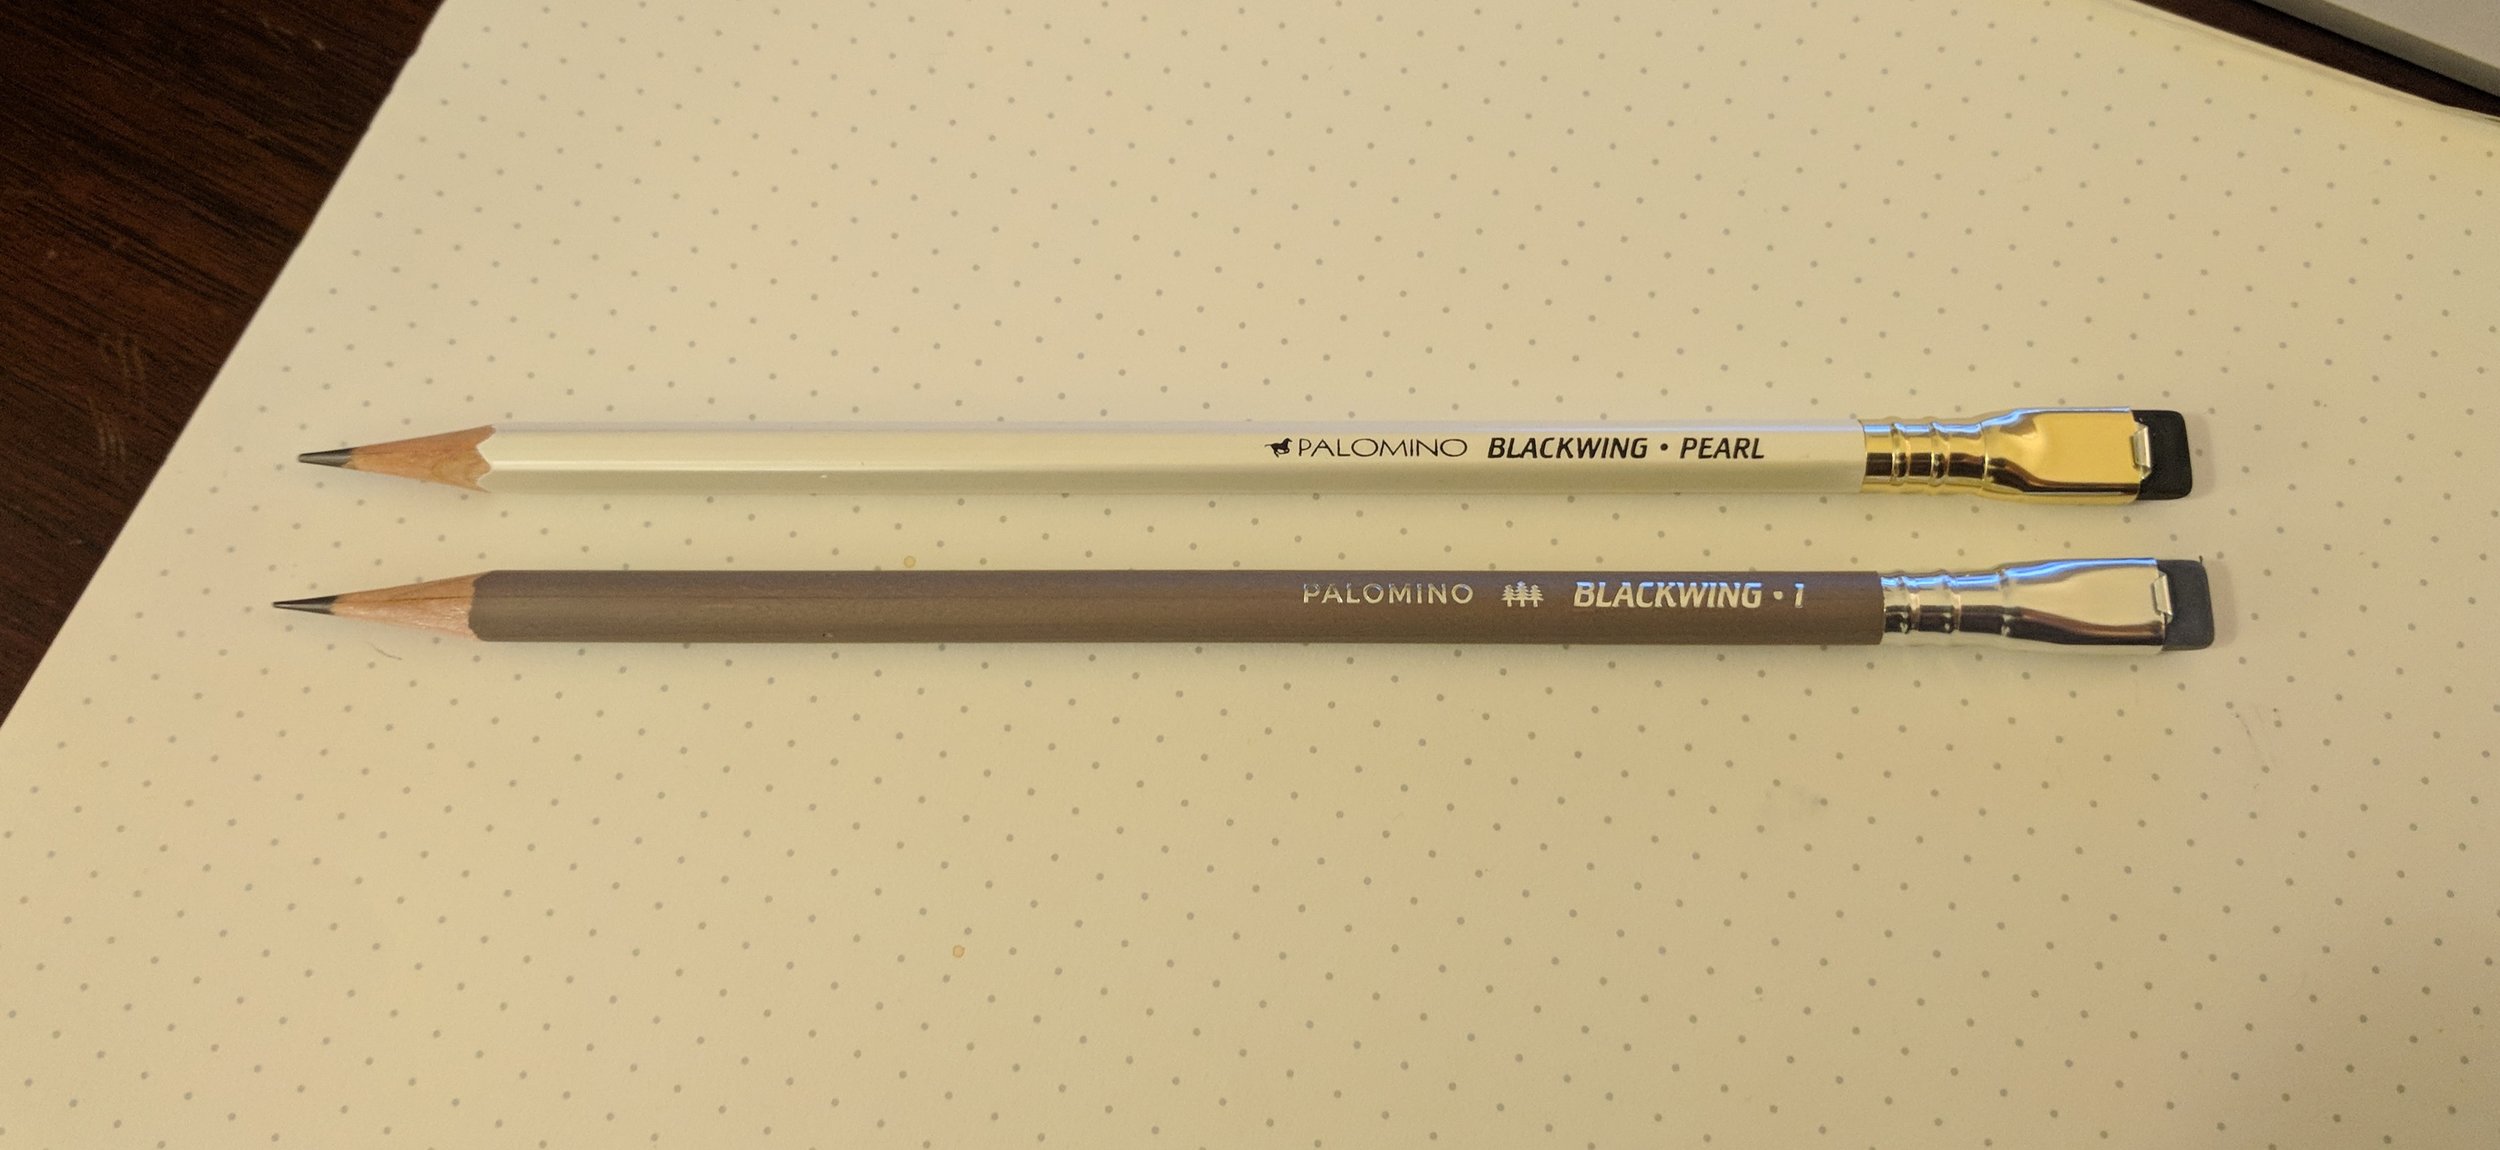 Blackwing 602: Why Is Hollywood Obsessed With This Pencil? – The Hollywood  Reporter